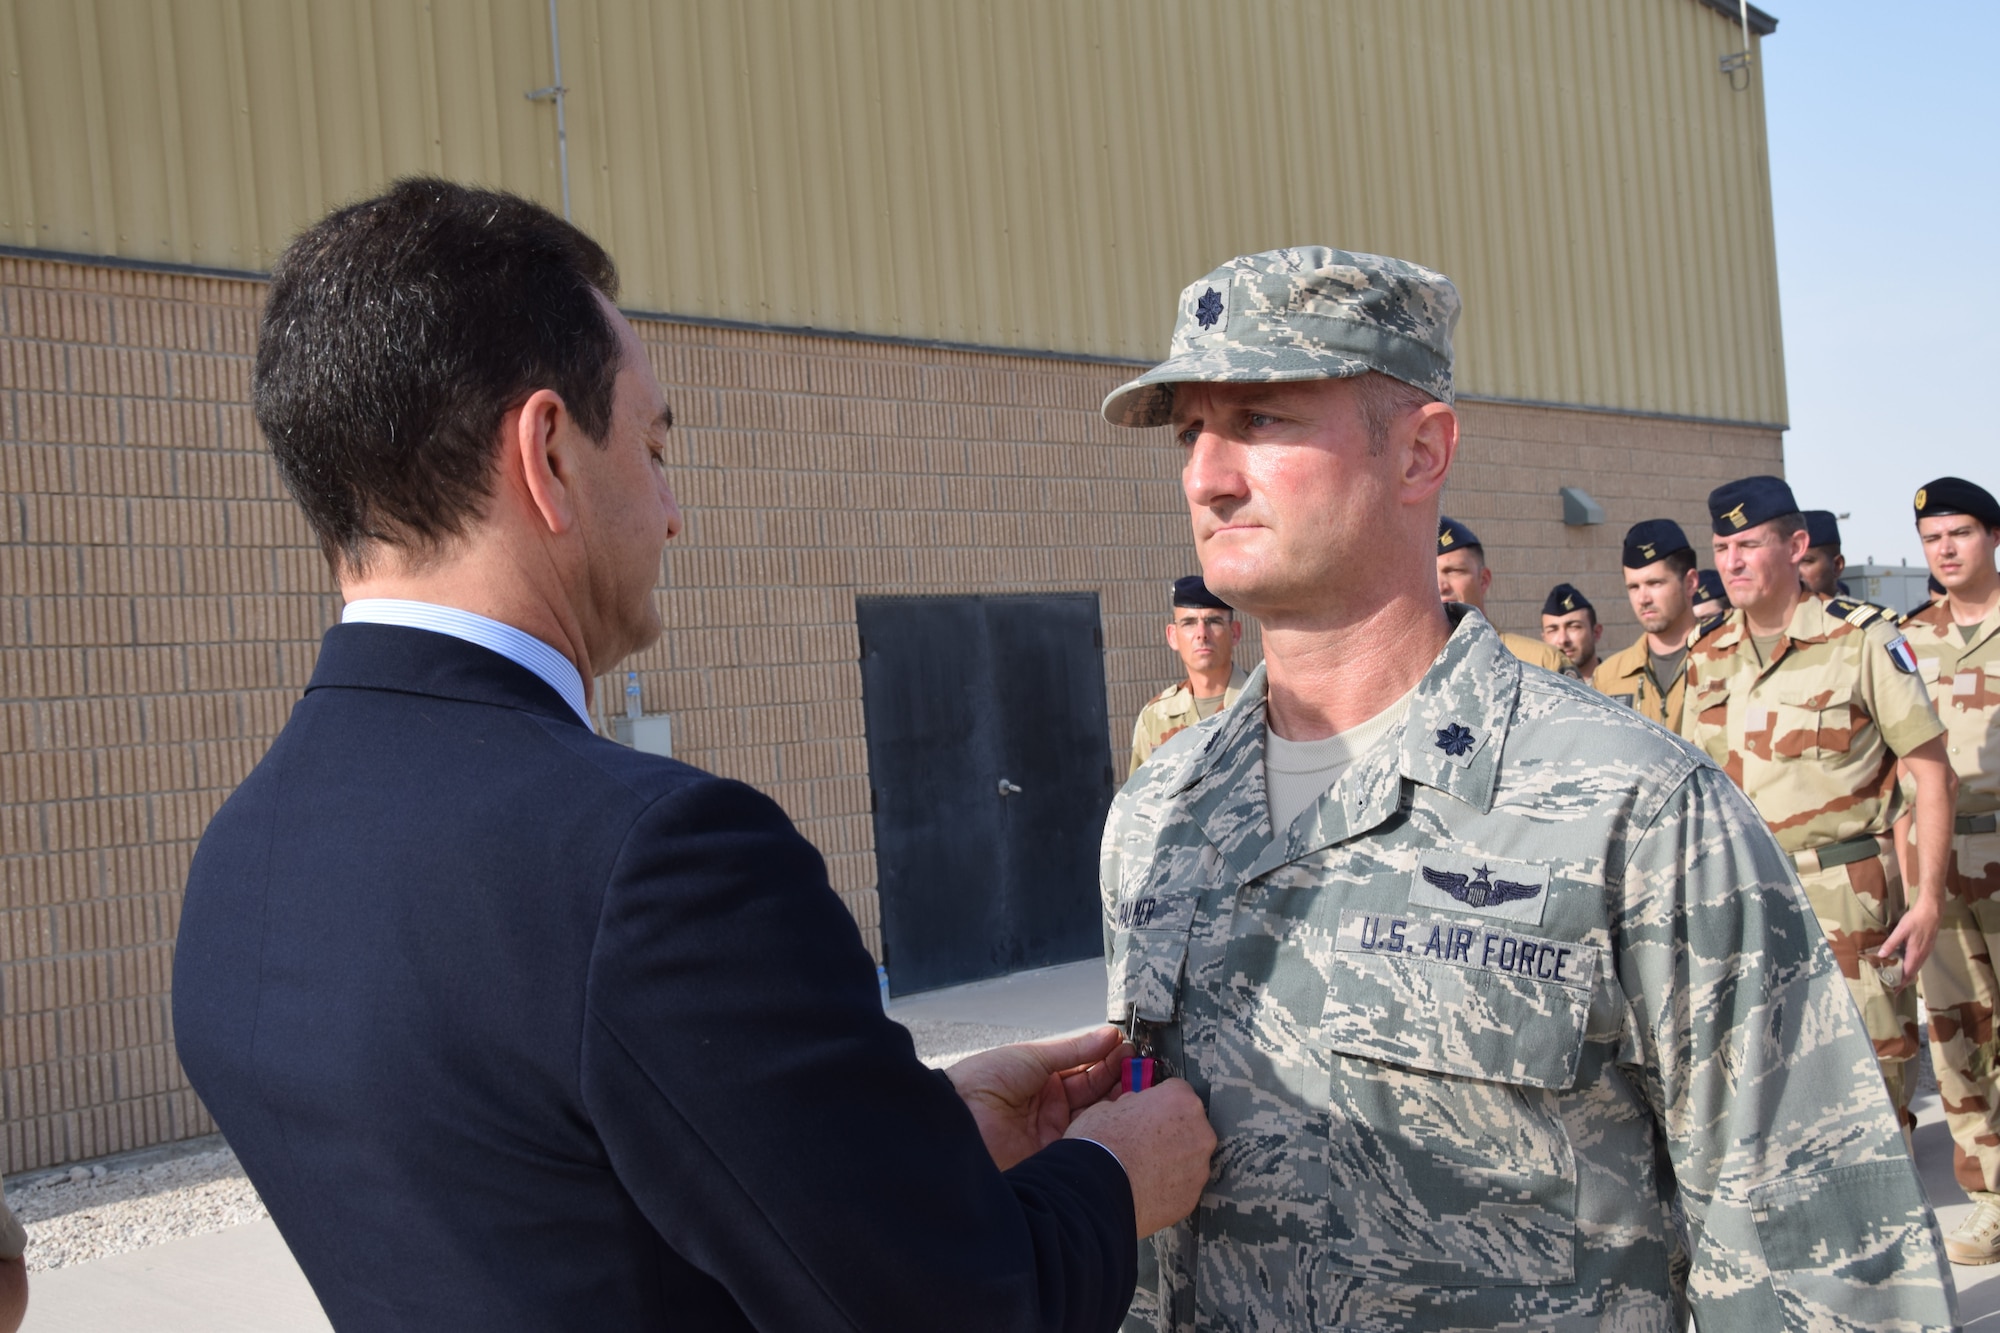 Monsieur Eric Chevallier, Ambassador of France to Qatar, pins a bronze French National Defense medal onto Lt. Col. Charles Palmer, chief of the coalition’s liaison cell, during the Bastille Day ceremony July 14, 2016, at Al Udeid Air Base, Qatar. The French National Day, often called “Bastille Day,” celebrates Liberty, Equality and Fraternity in France. France is one of 20 nations supporting the air Coalition that provides decisive air and space power to combat Daesh and other terrorist organizations and ensure the stability of the Southwest Asia region. (U.S. Air Force photo/Carlos J. Treviño/Released)
